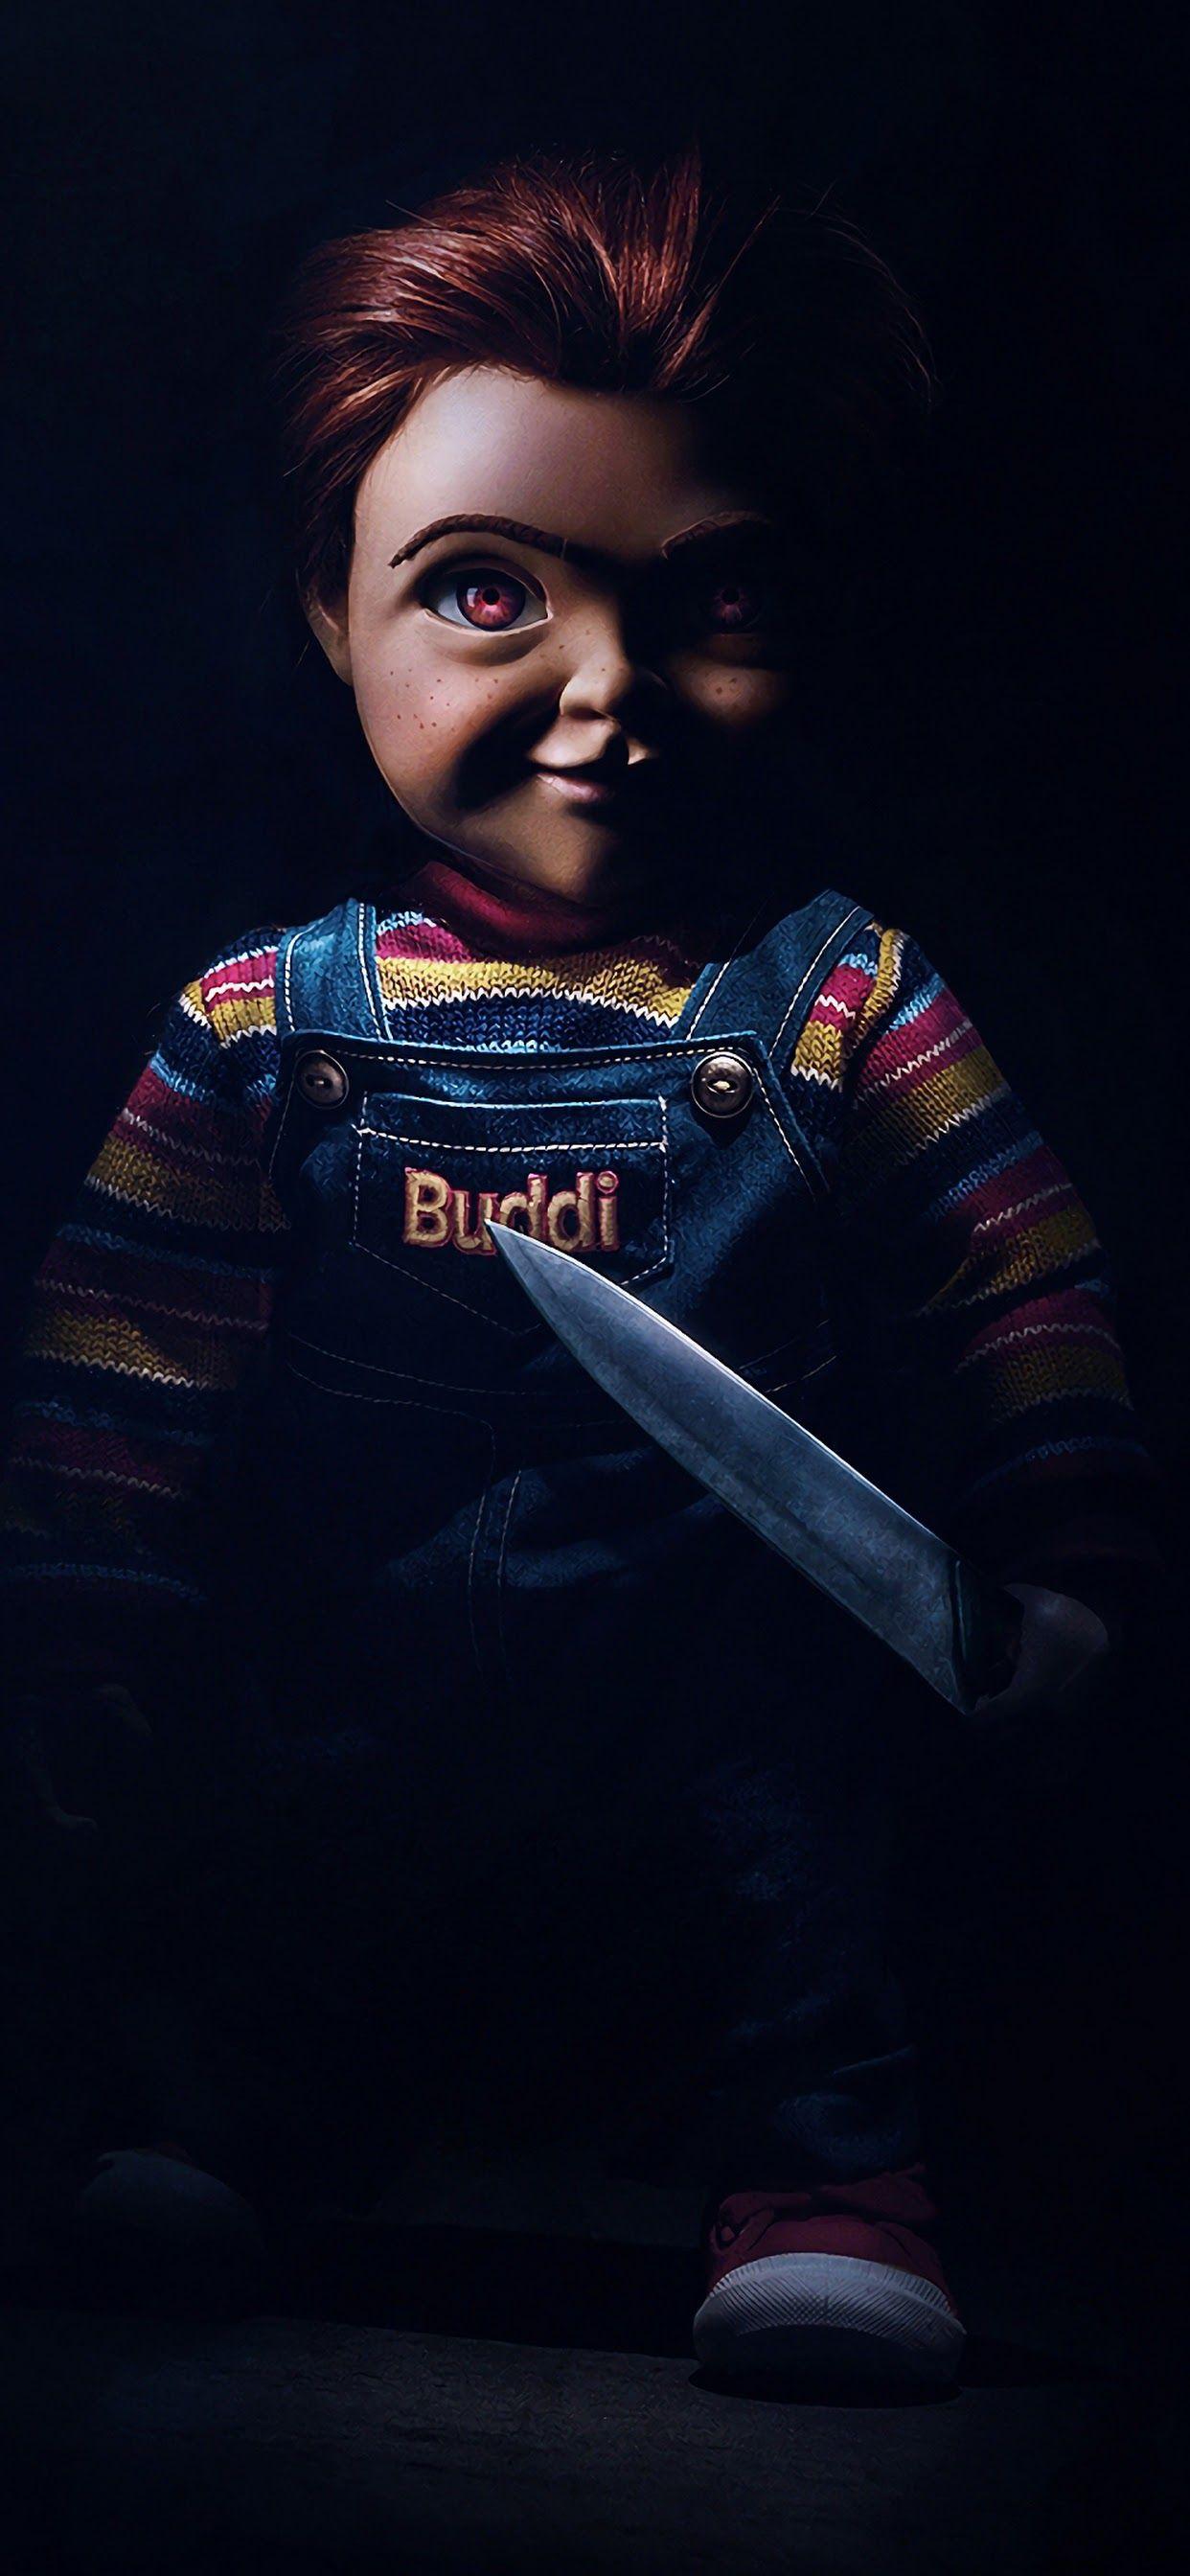 Share more than 58 chucky iphone wallpaper - in.cdgdbentre